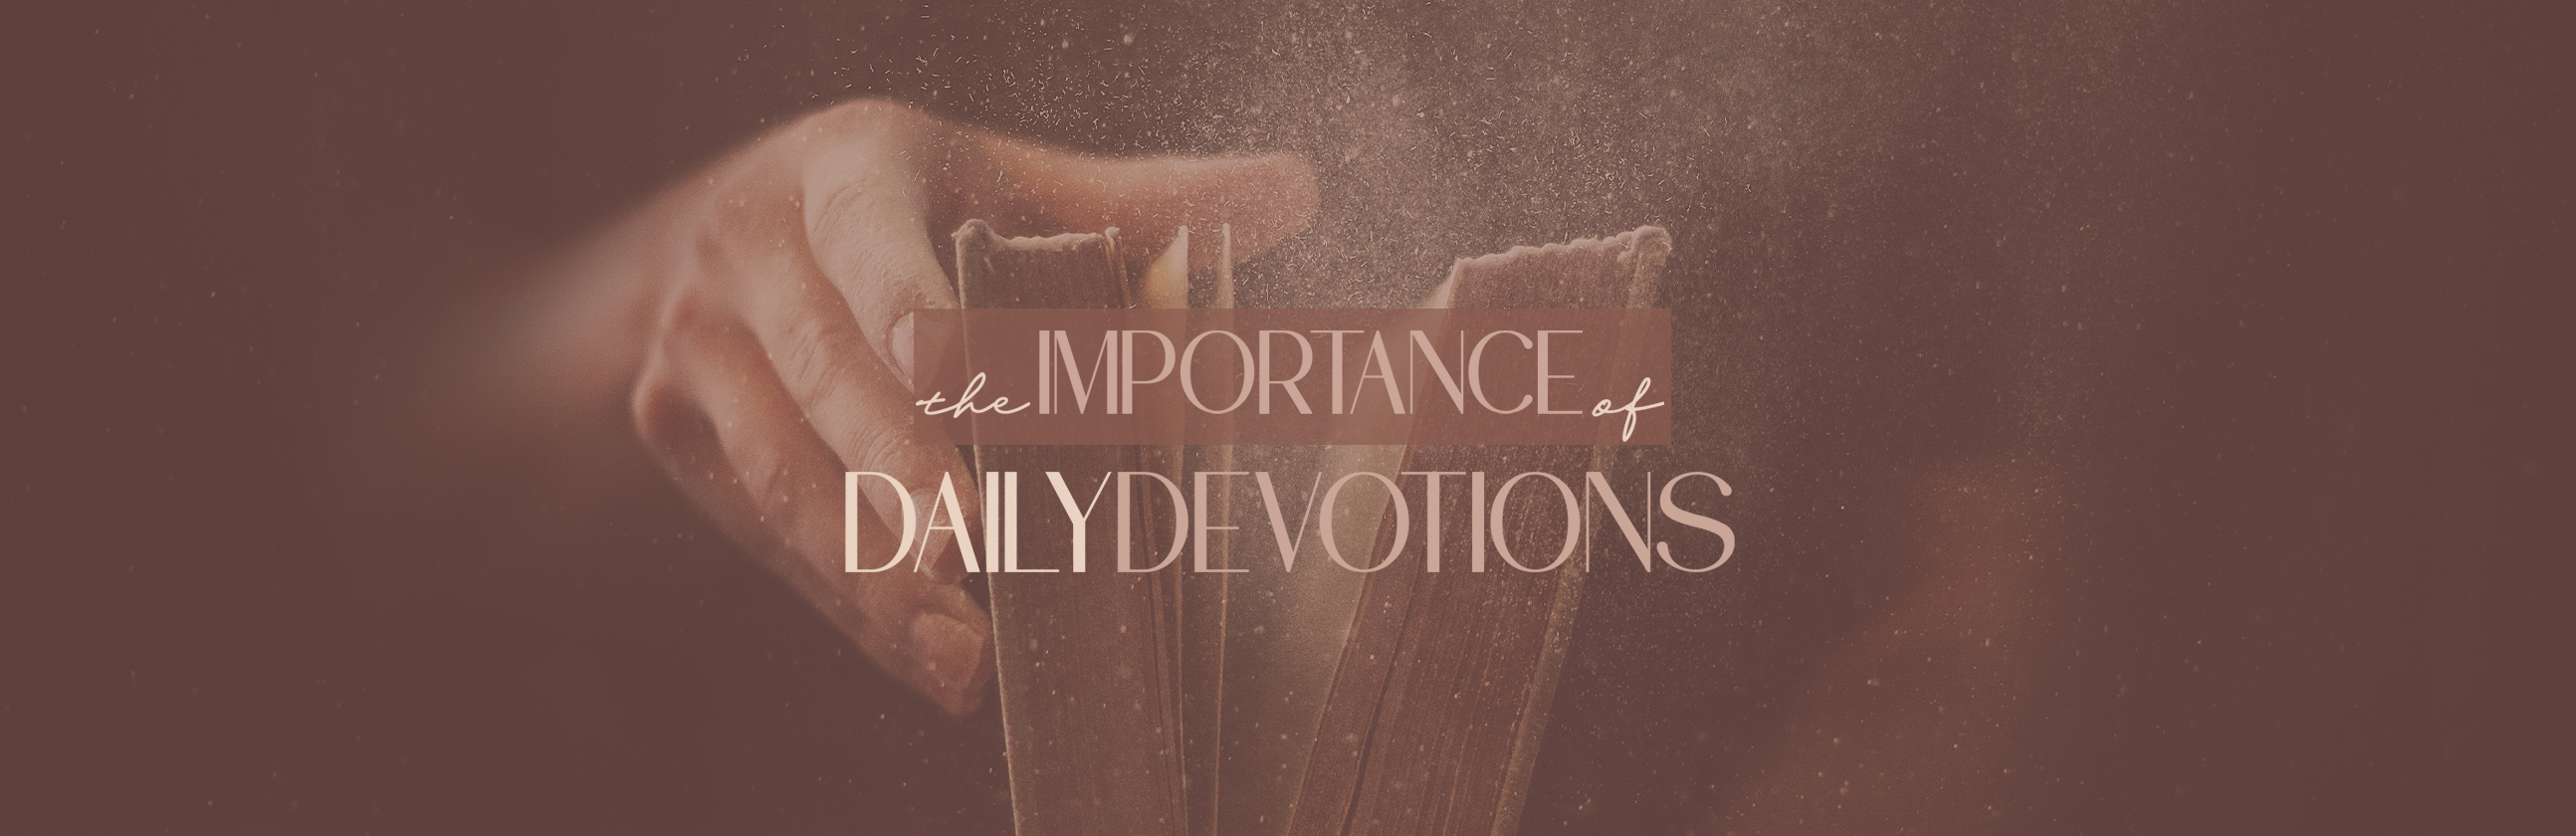 The Importance of Daily Devotions